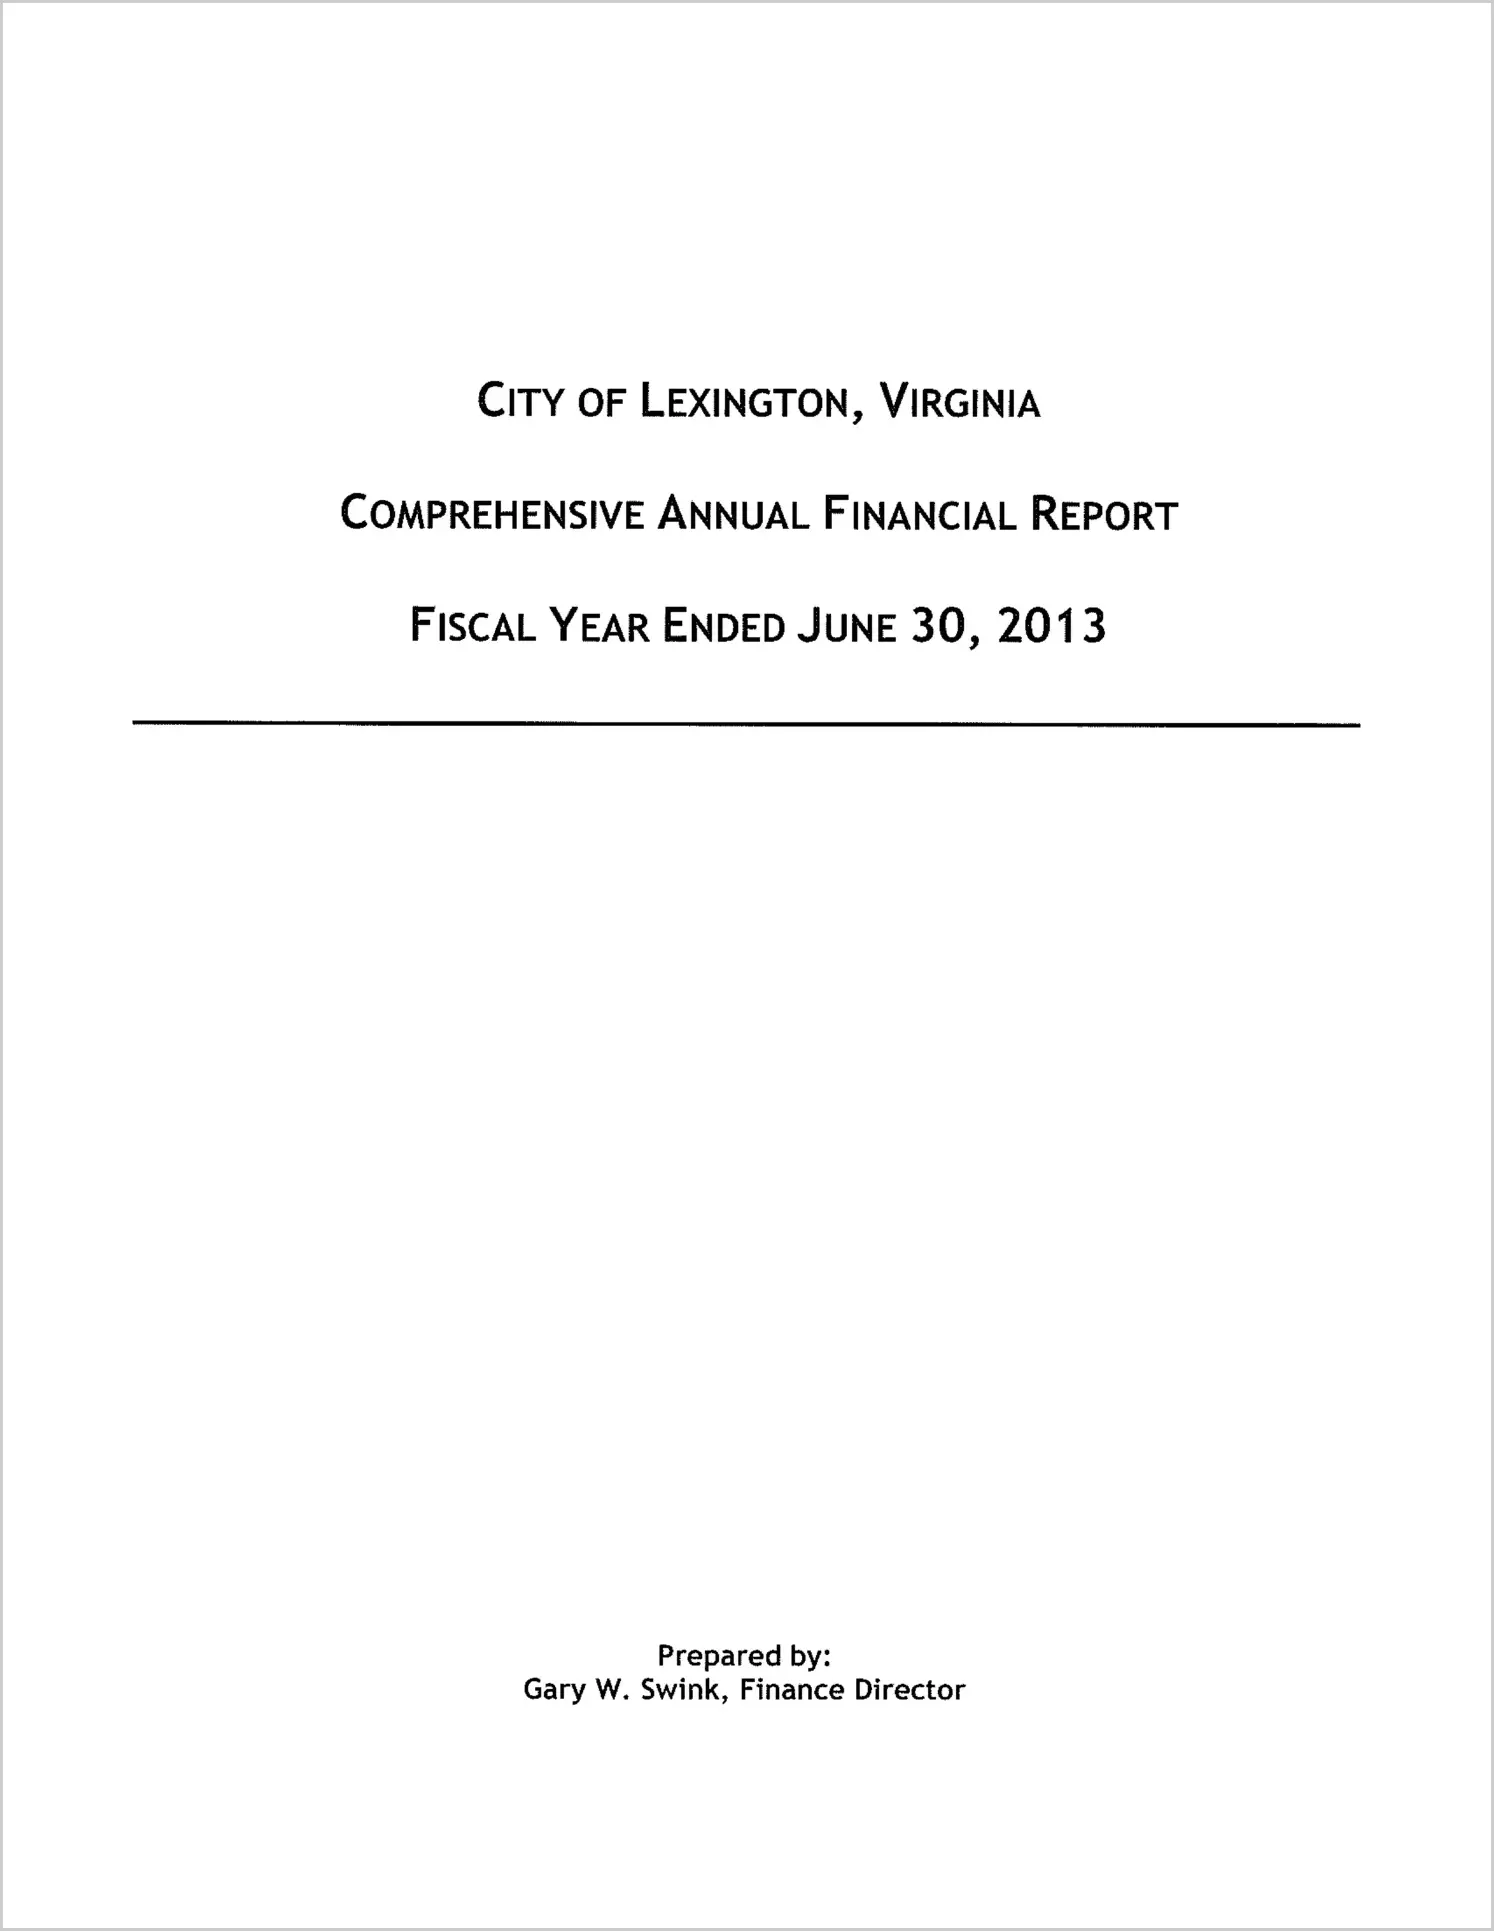 2013 Annual Financial Report for City of Lexington